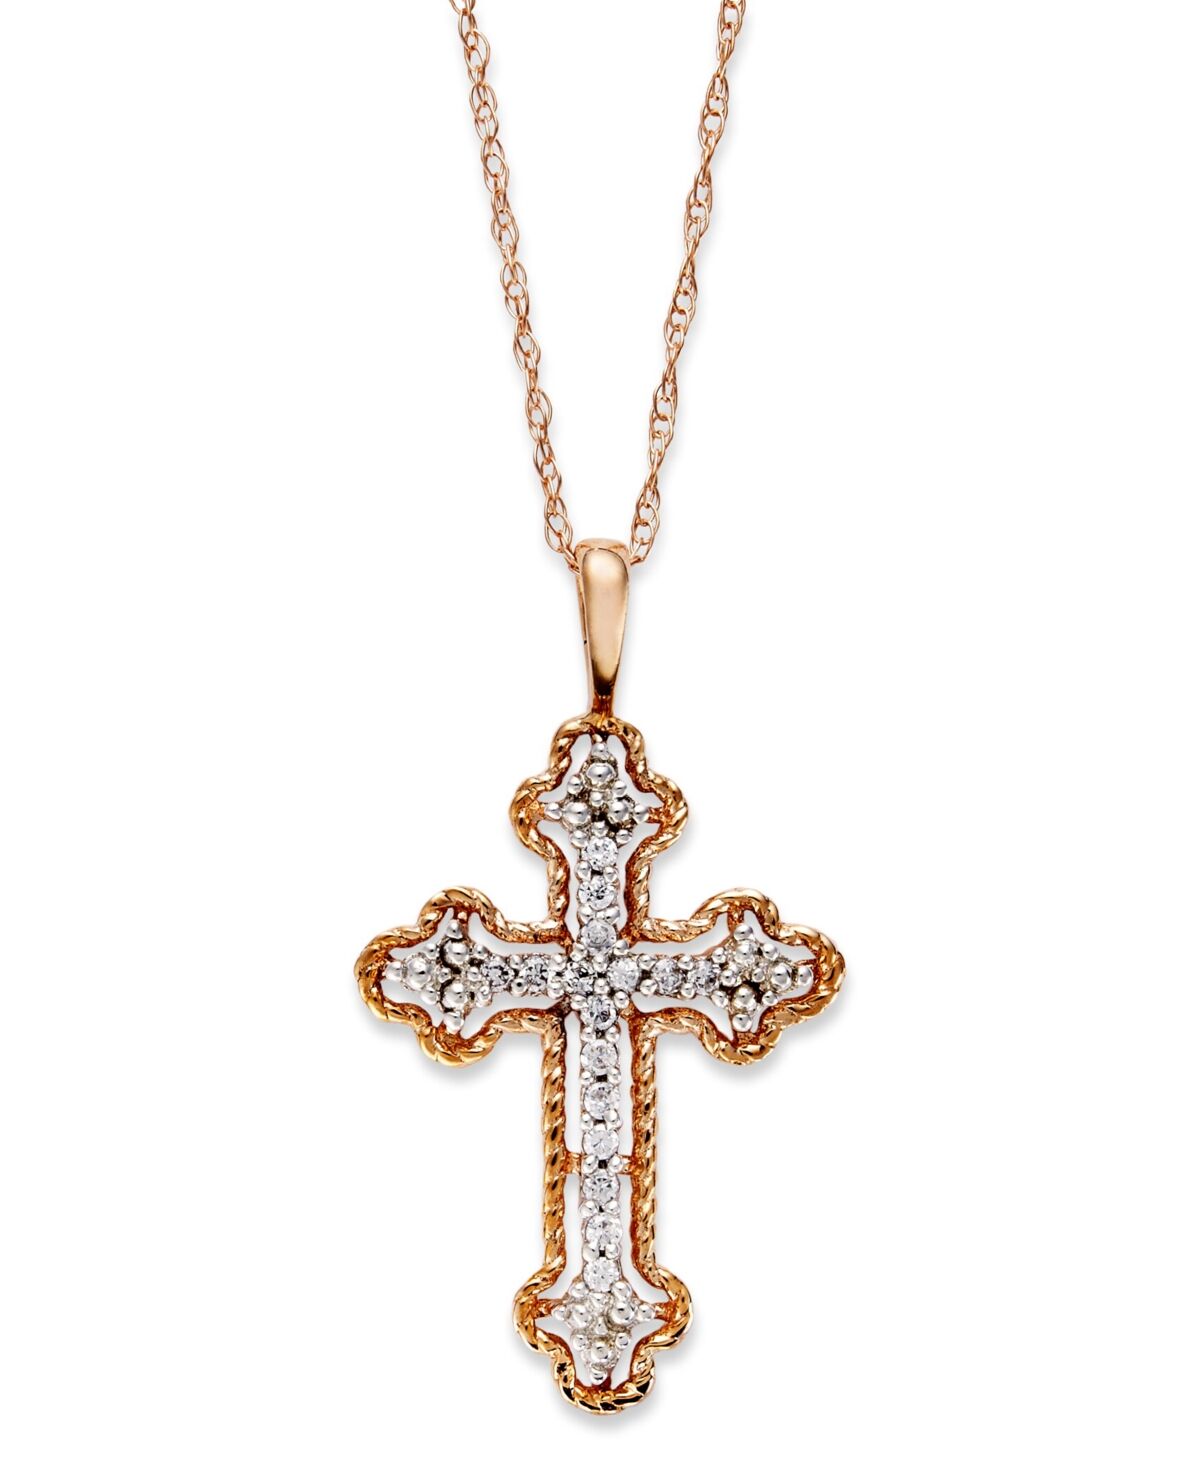 Macy's Diamond Antique Cross Pendant Necklace in 14k White, Yellow, or Rose Gold (1/10 ct. t.w) - Rose Gold